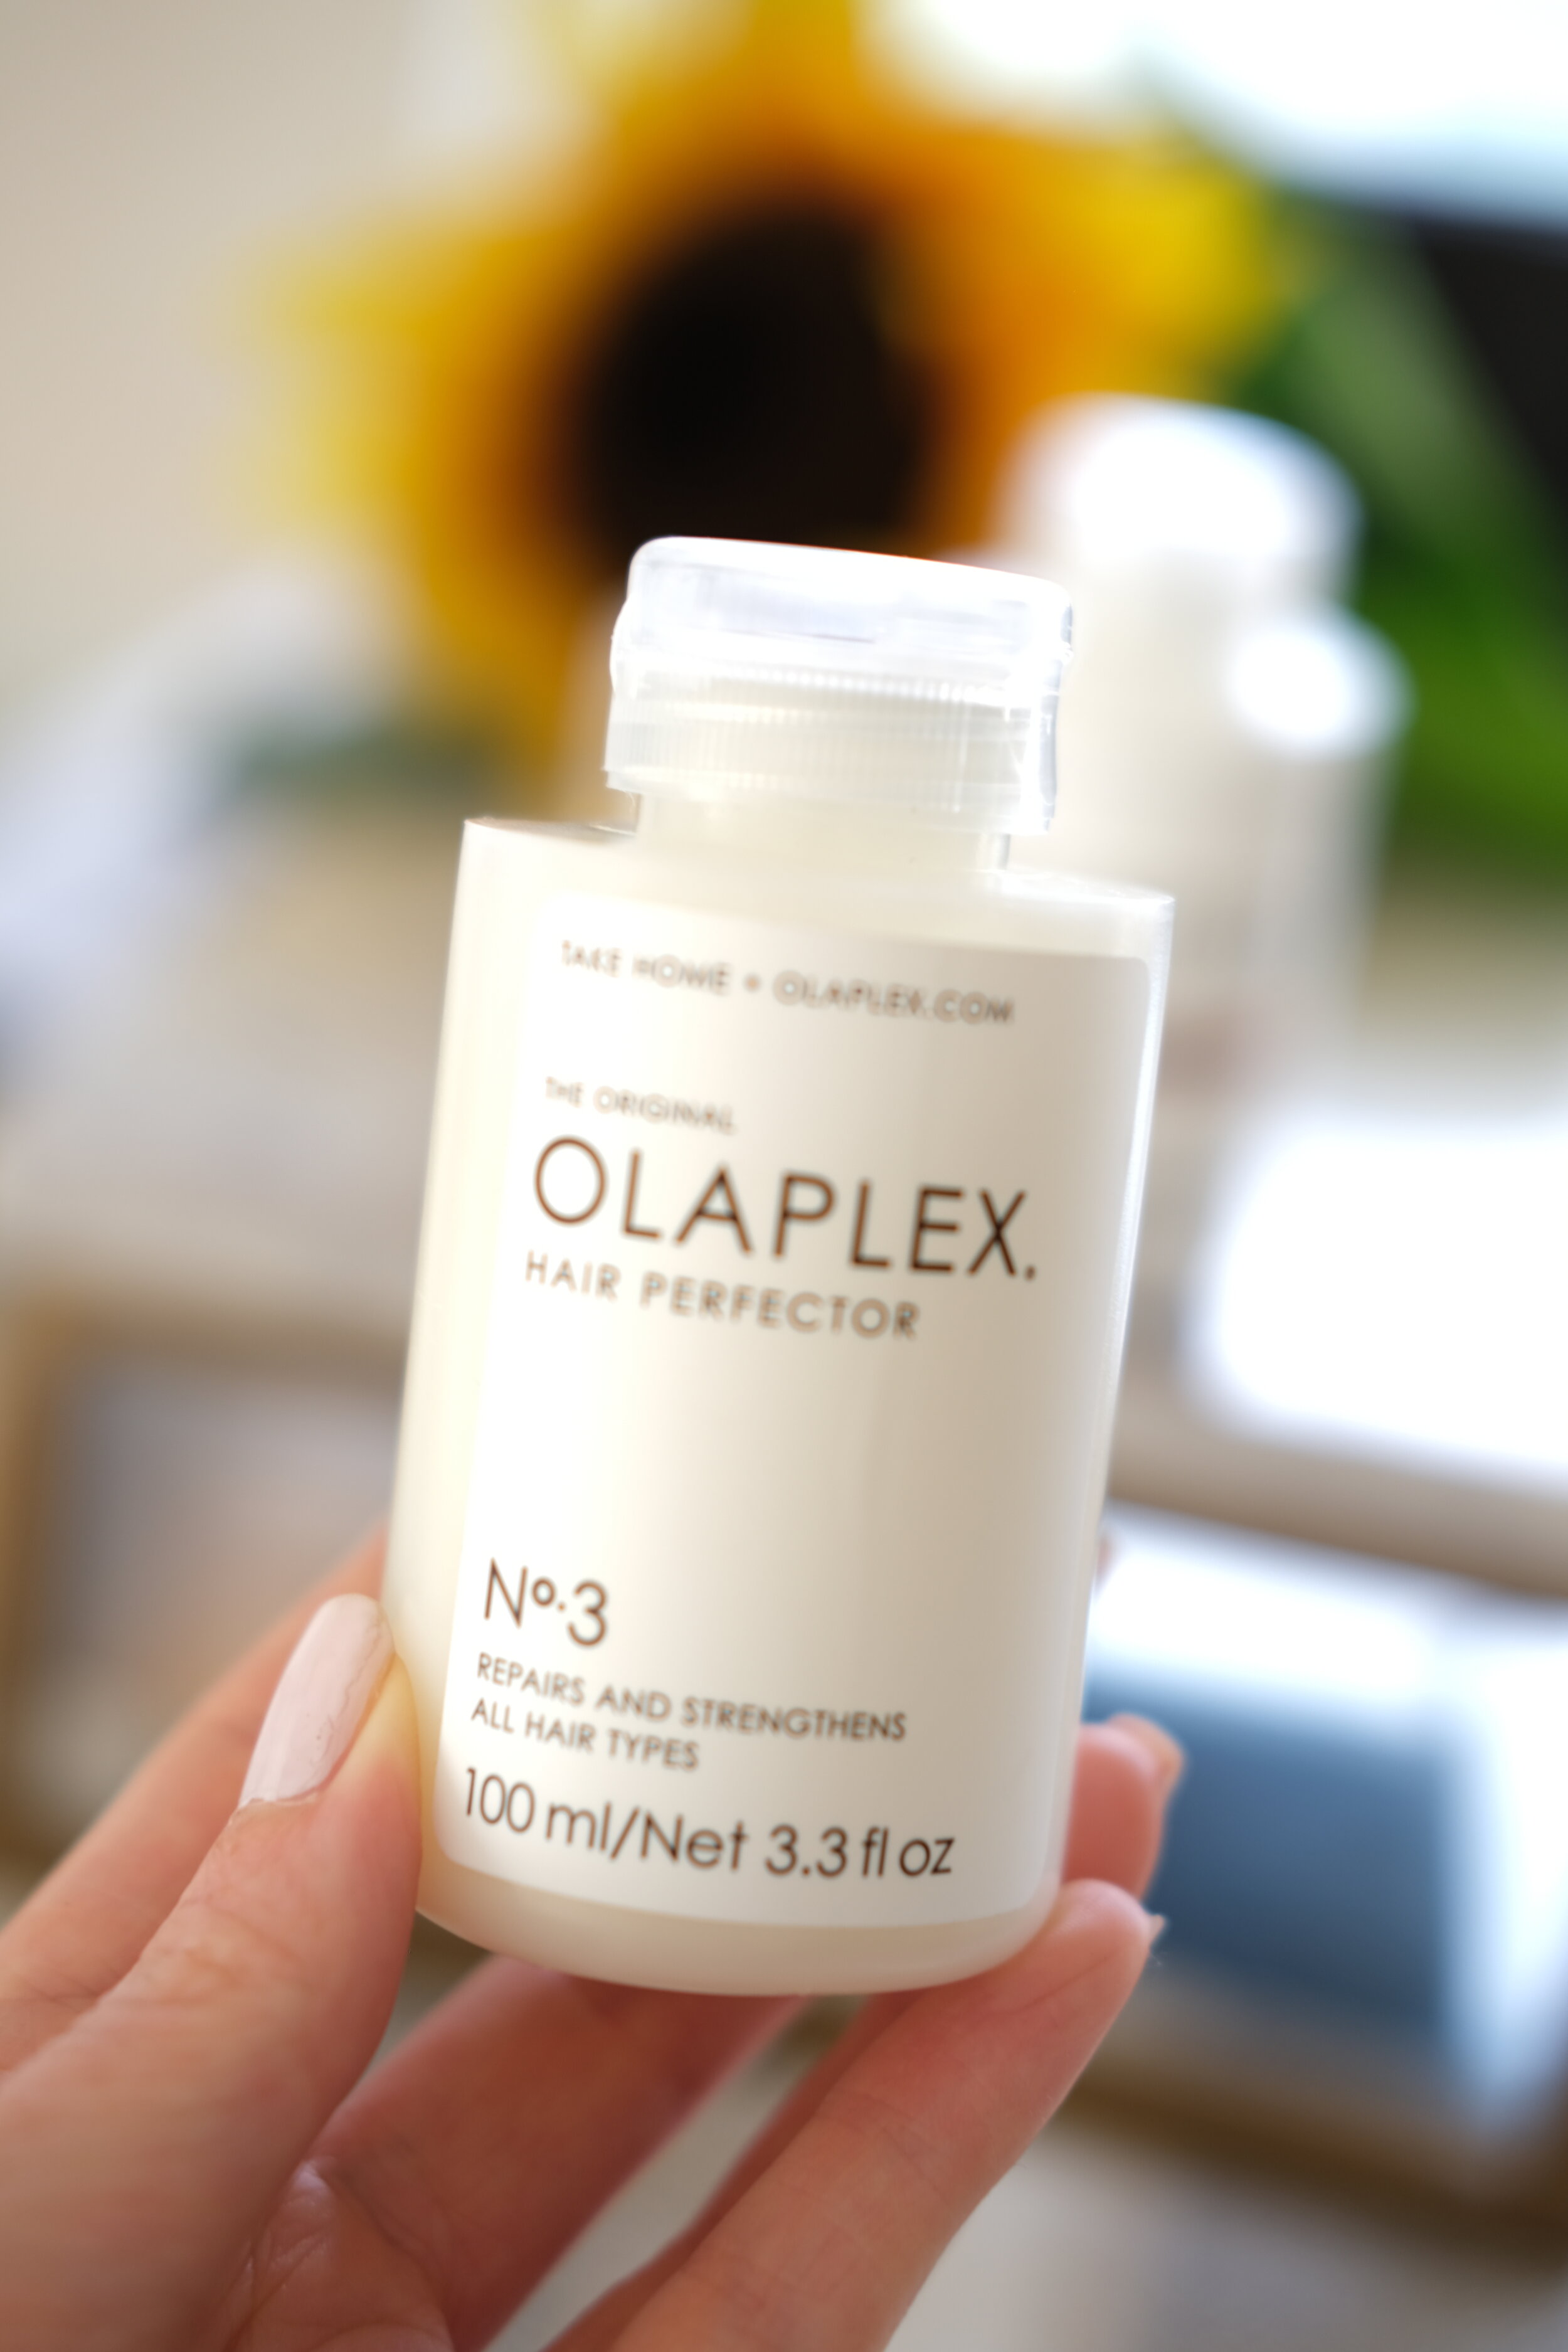 Learn everything you need to know about Olaplex hair perfector treatment in this detailed Olaplex 3 review. I’ve included Olaplex 3 before and after pictures to help you see the Olaplex 3 results that I experienced. Find out if Olaplex 3 is worth it